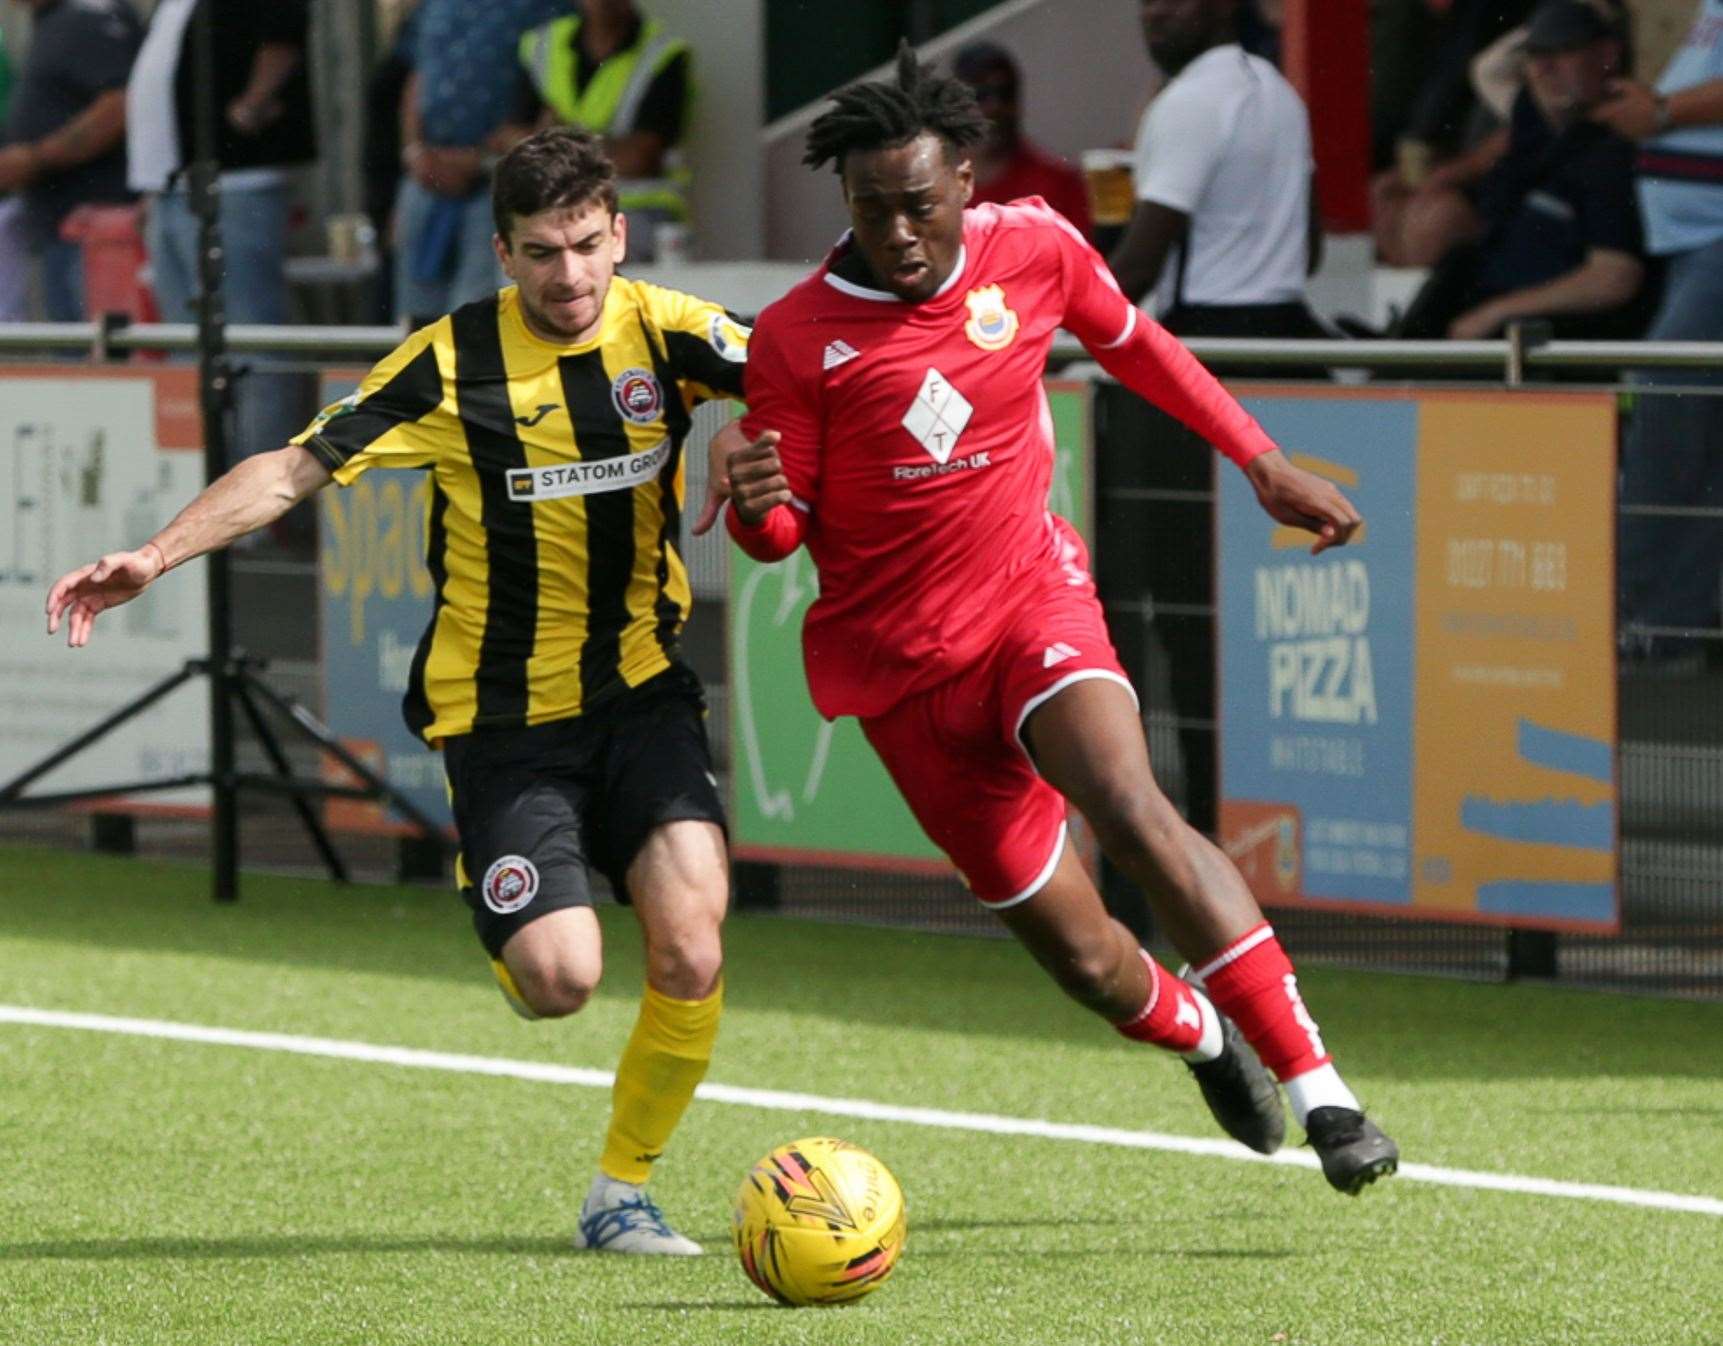 Eri-Oluwa Akintimehin, of Whitstable, races down the wing. Picture: Les Biggs